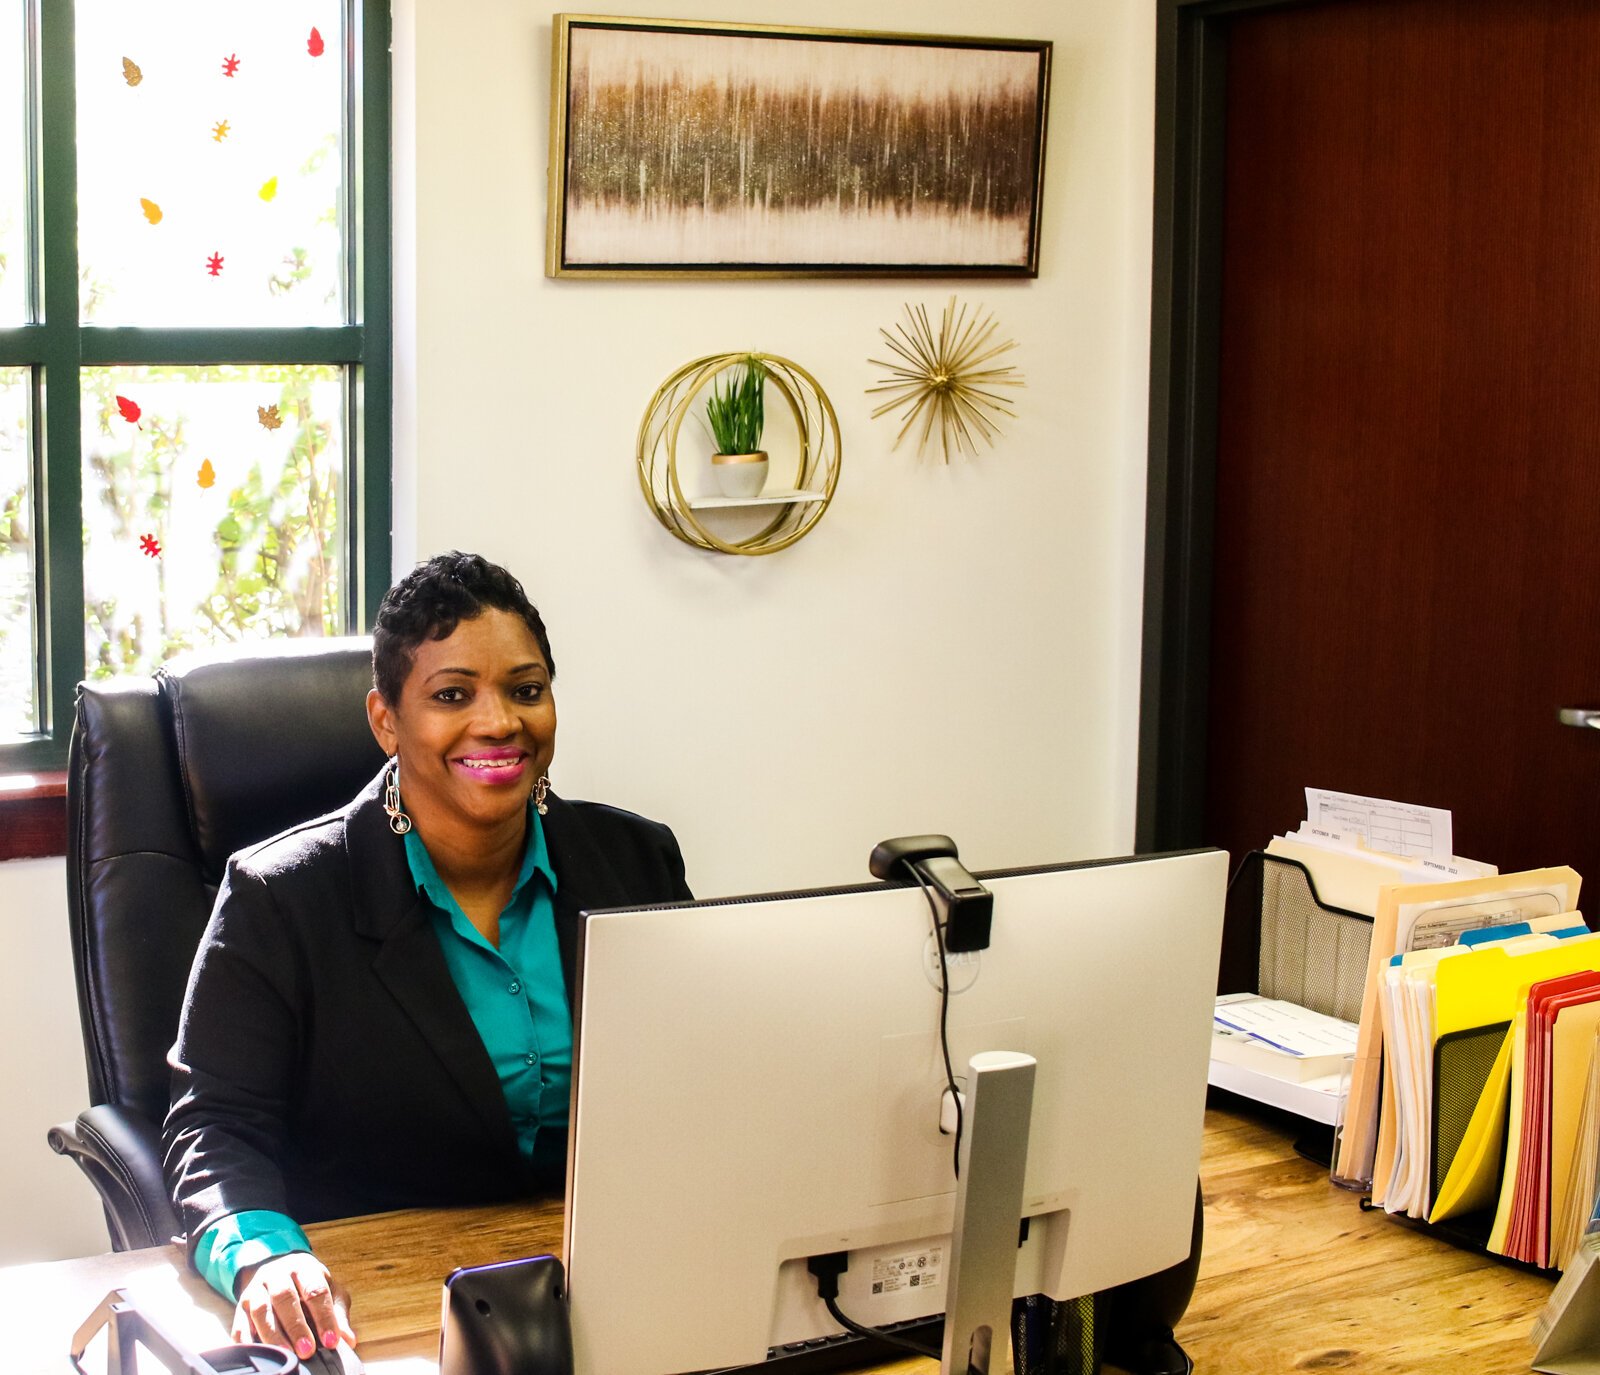 Urban Beginnings Choice Federal Credit Union is a certified CDFI. Chief Executive Officer Diane Starks is part of a small team serving more than 265 members.